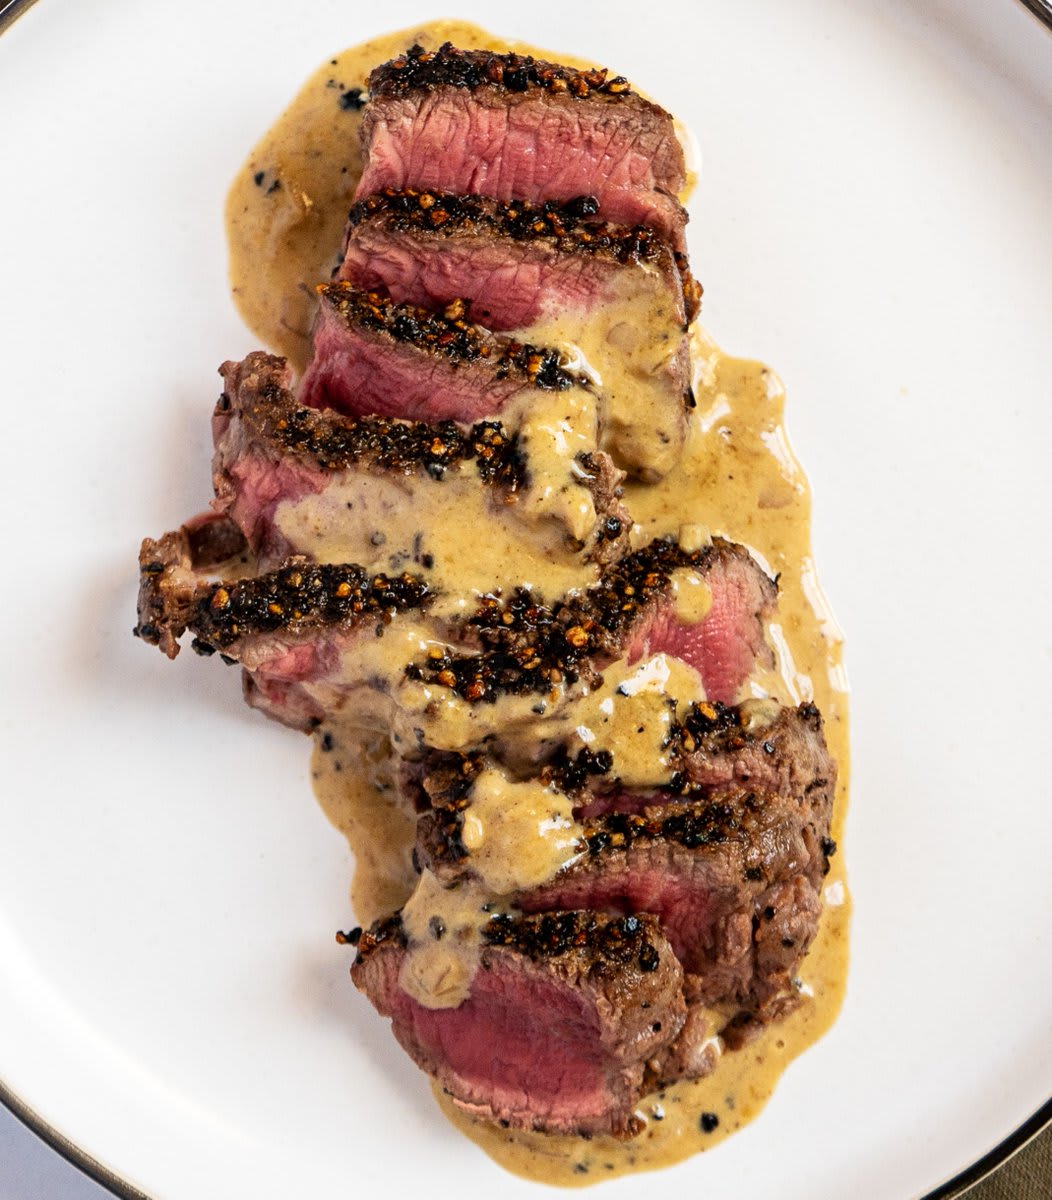 Steak au poivre has become a bistro mainstay for good reason. Lean, mild-flavored filet mignon might appear to be center stage, but make no mistake: This dish is all about the peppercorns and Cognac cream pan sauce: